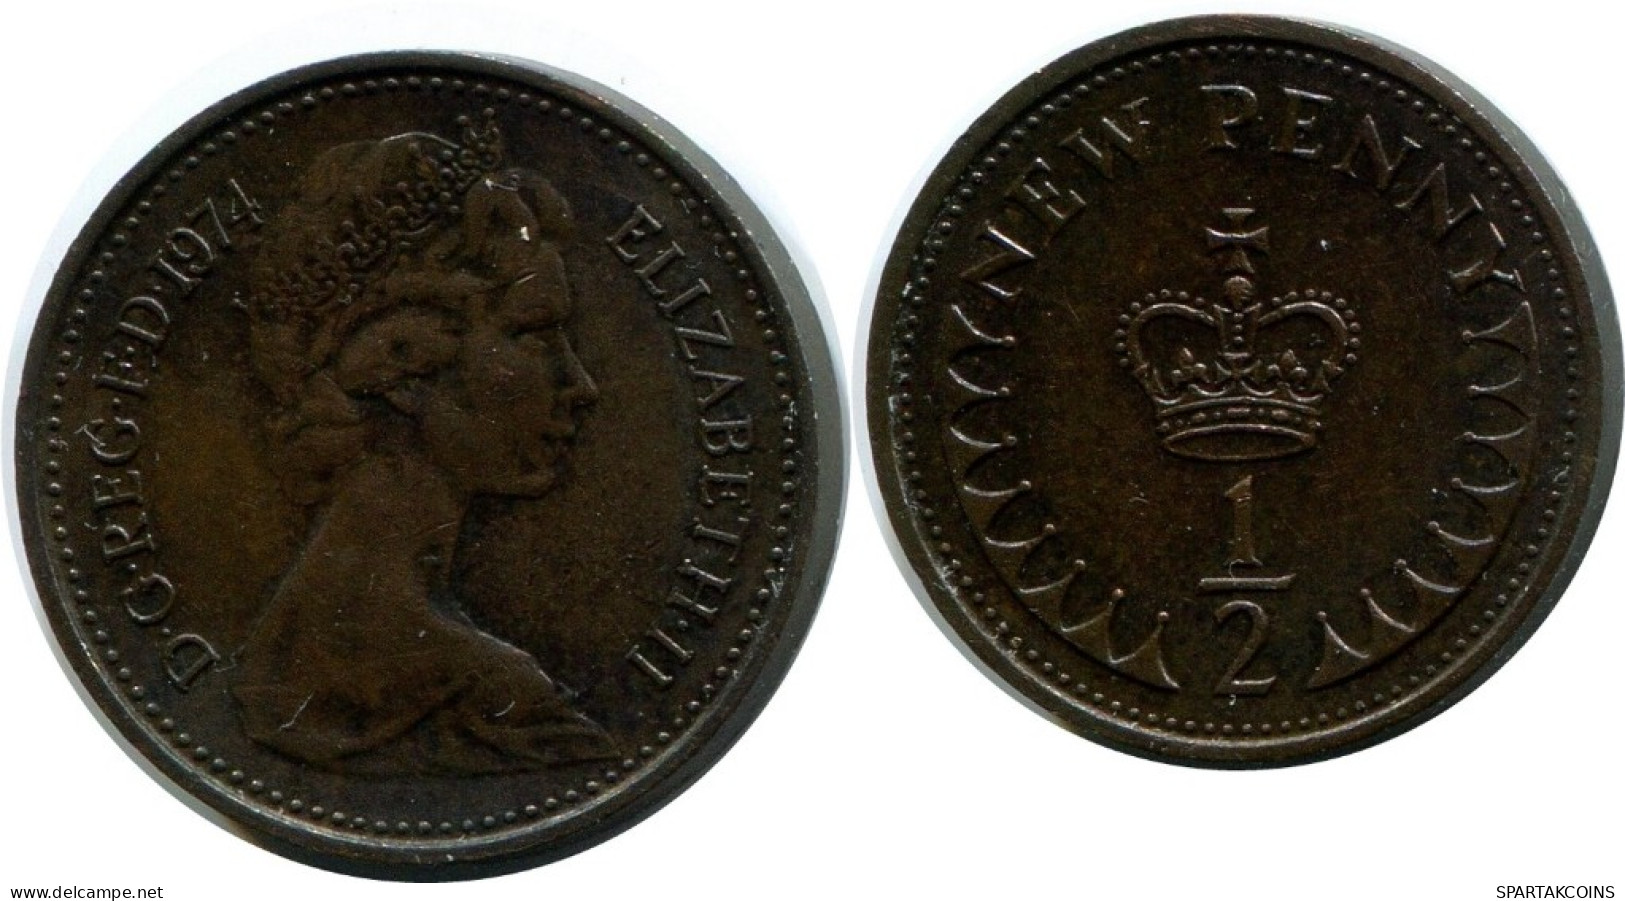 NEW PENNY 1974 UK GRANDE-BRETAGNE GREAT BRITAIN Pièce #AN523.F.A - 1 Penny & 1 New Penny